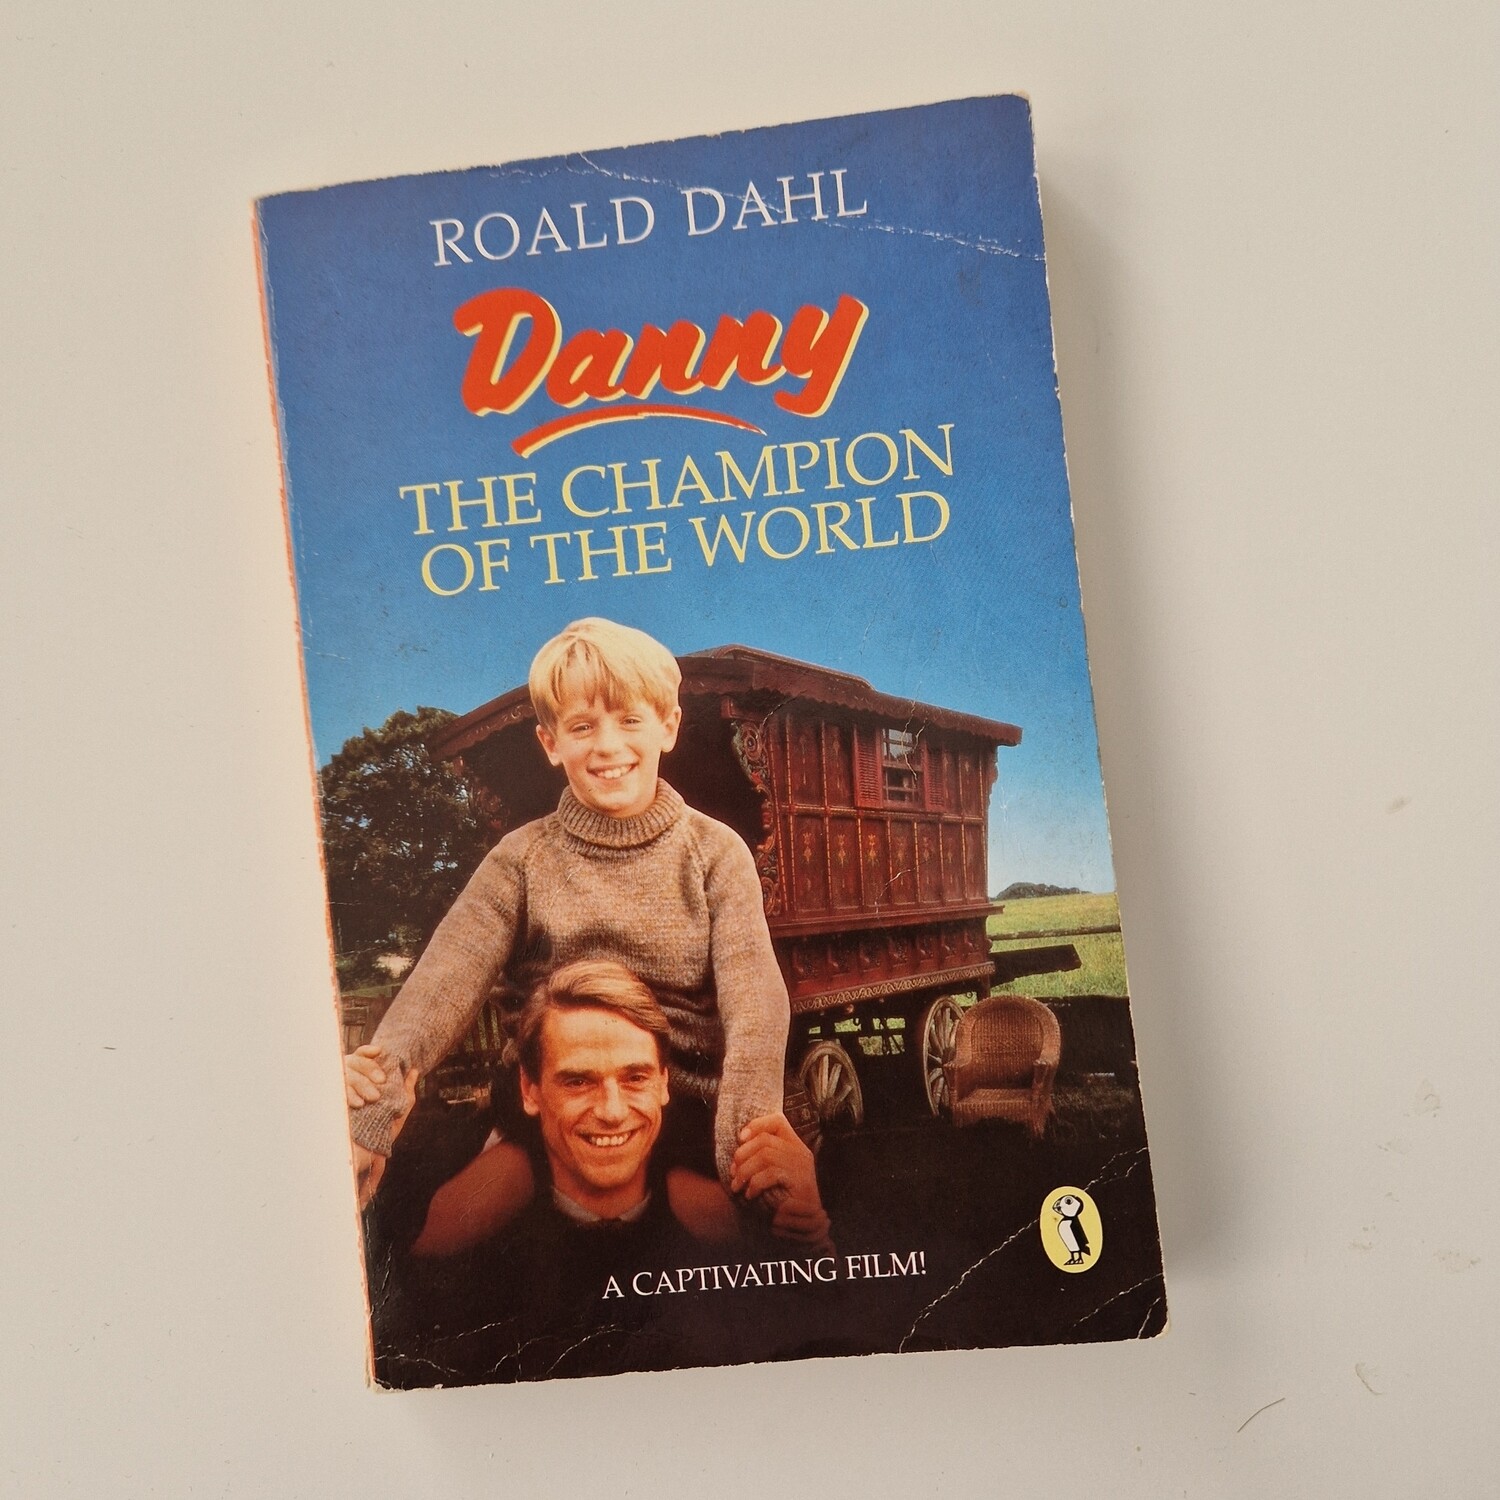 Roald Dahl Danny the Champion of the World Notebook- made from a paperback book